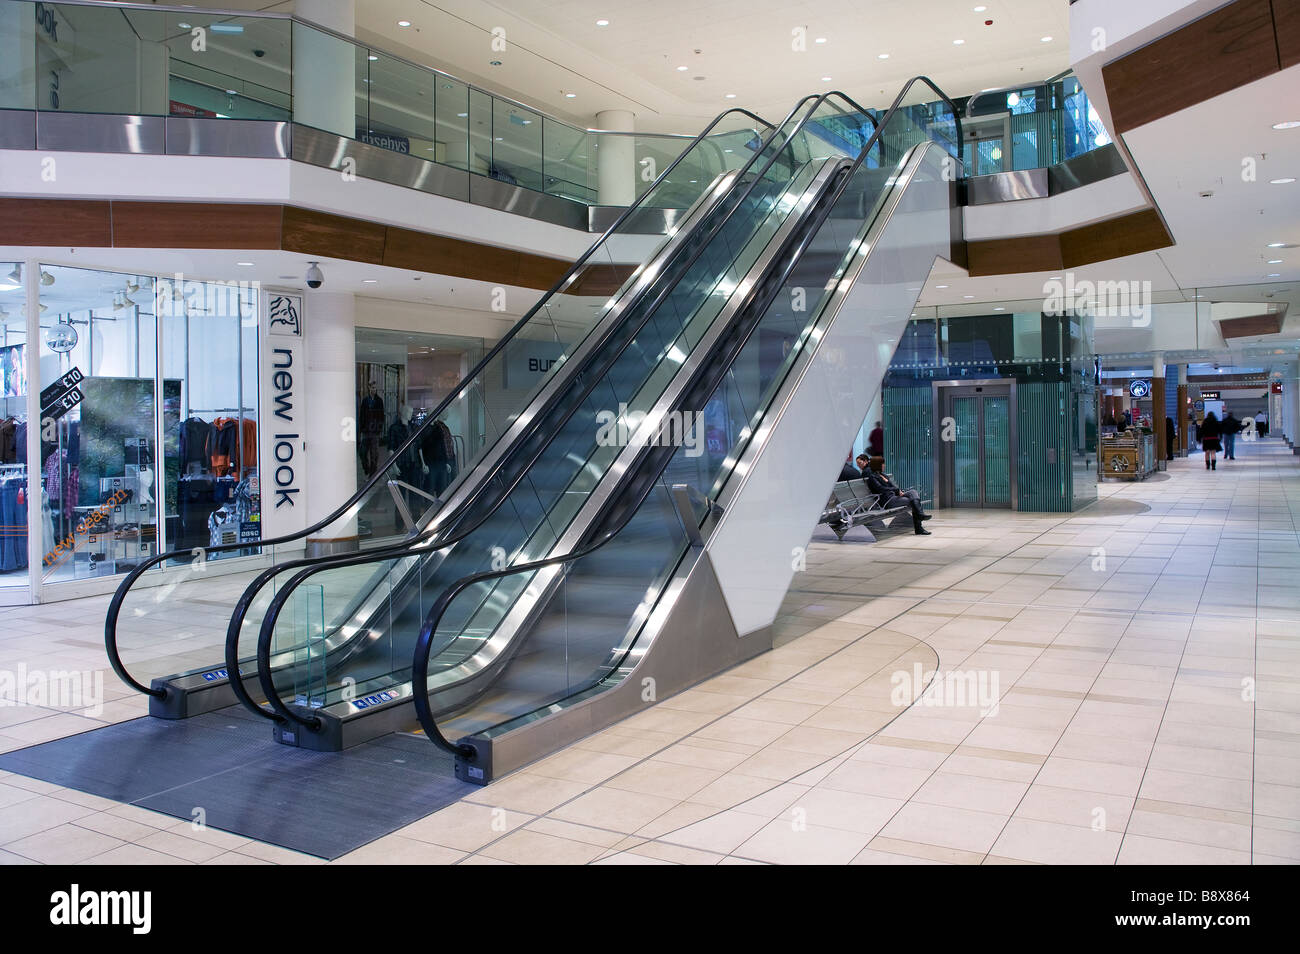 The Mall at Short Hills in New Jersey Editorial Stock Photo - Image of  commerce, escalator: 59220703